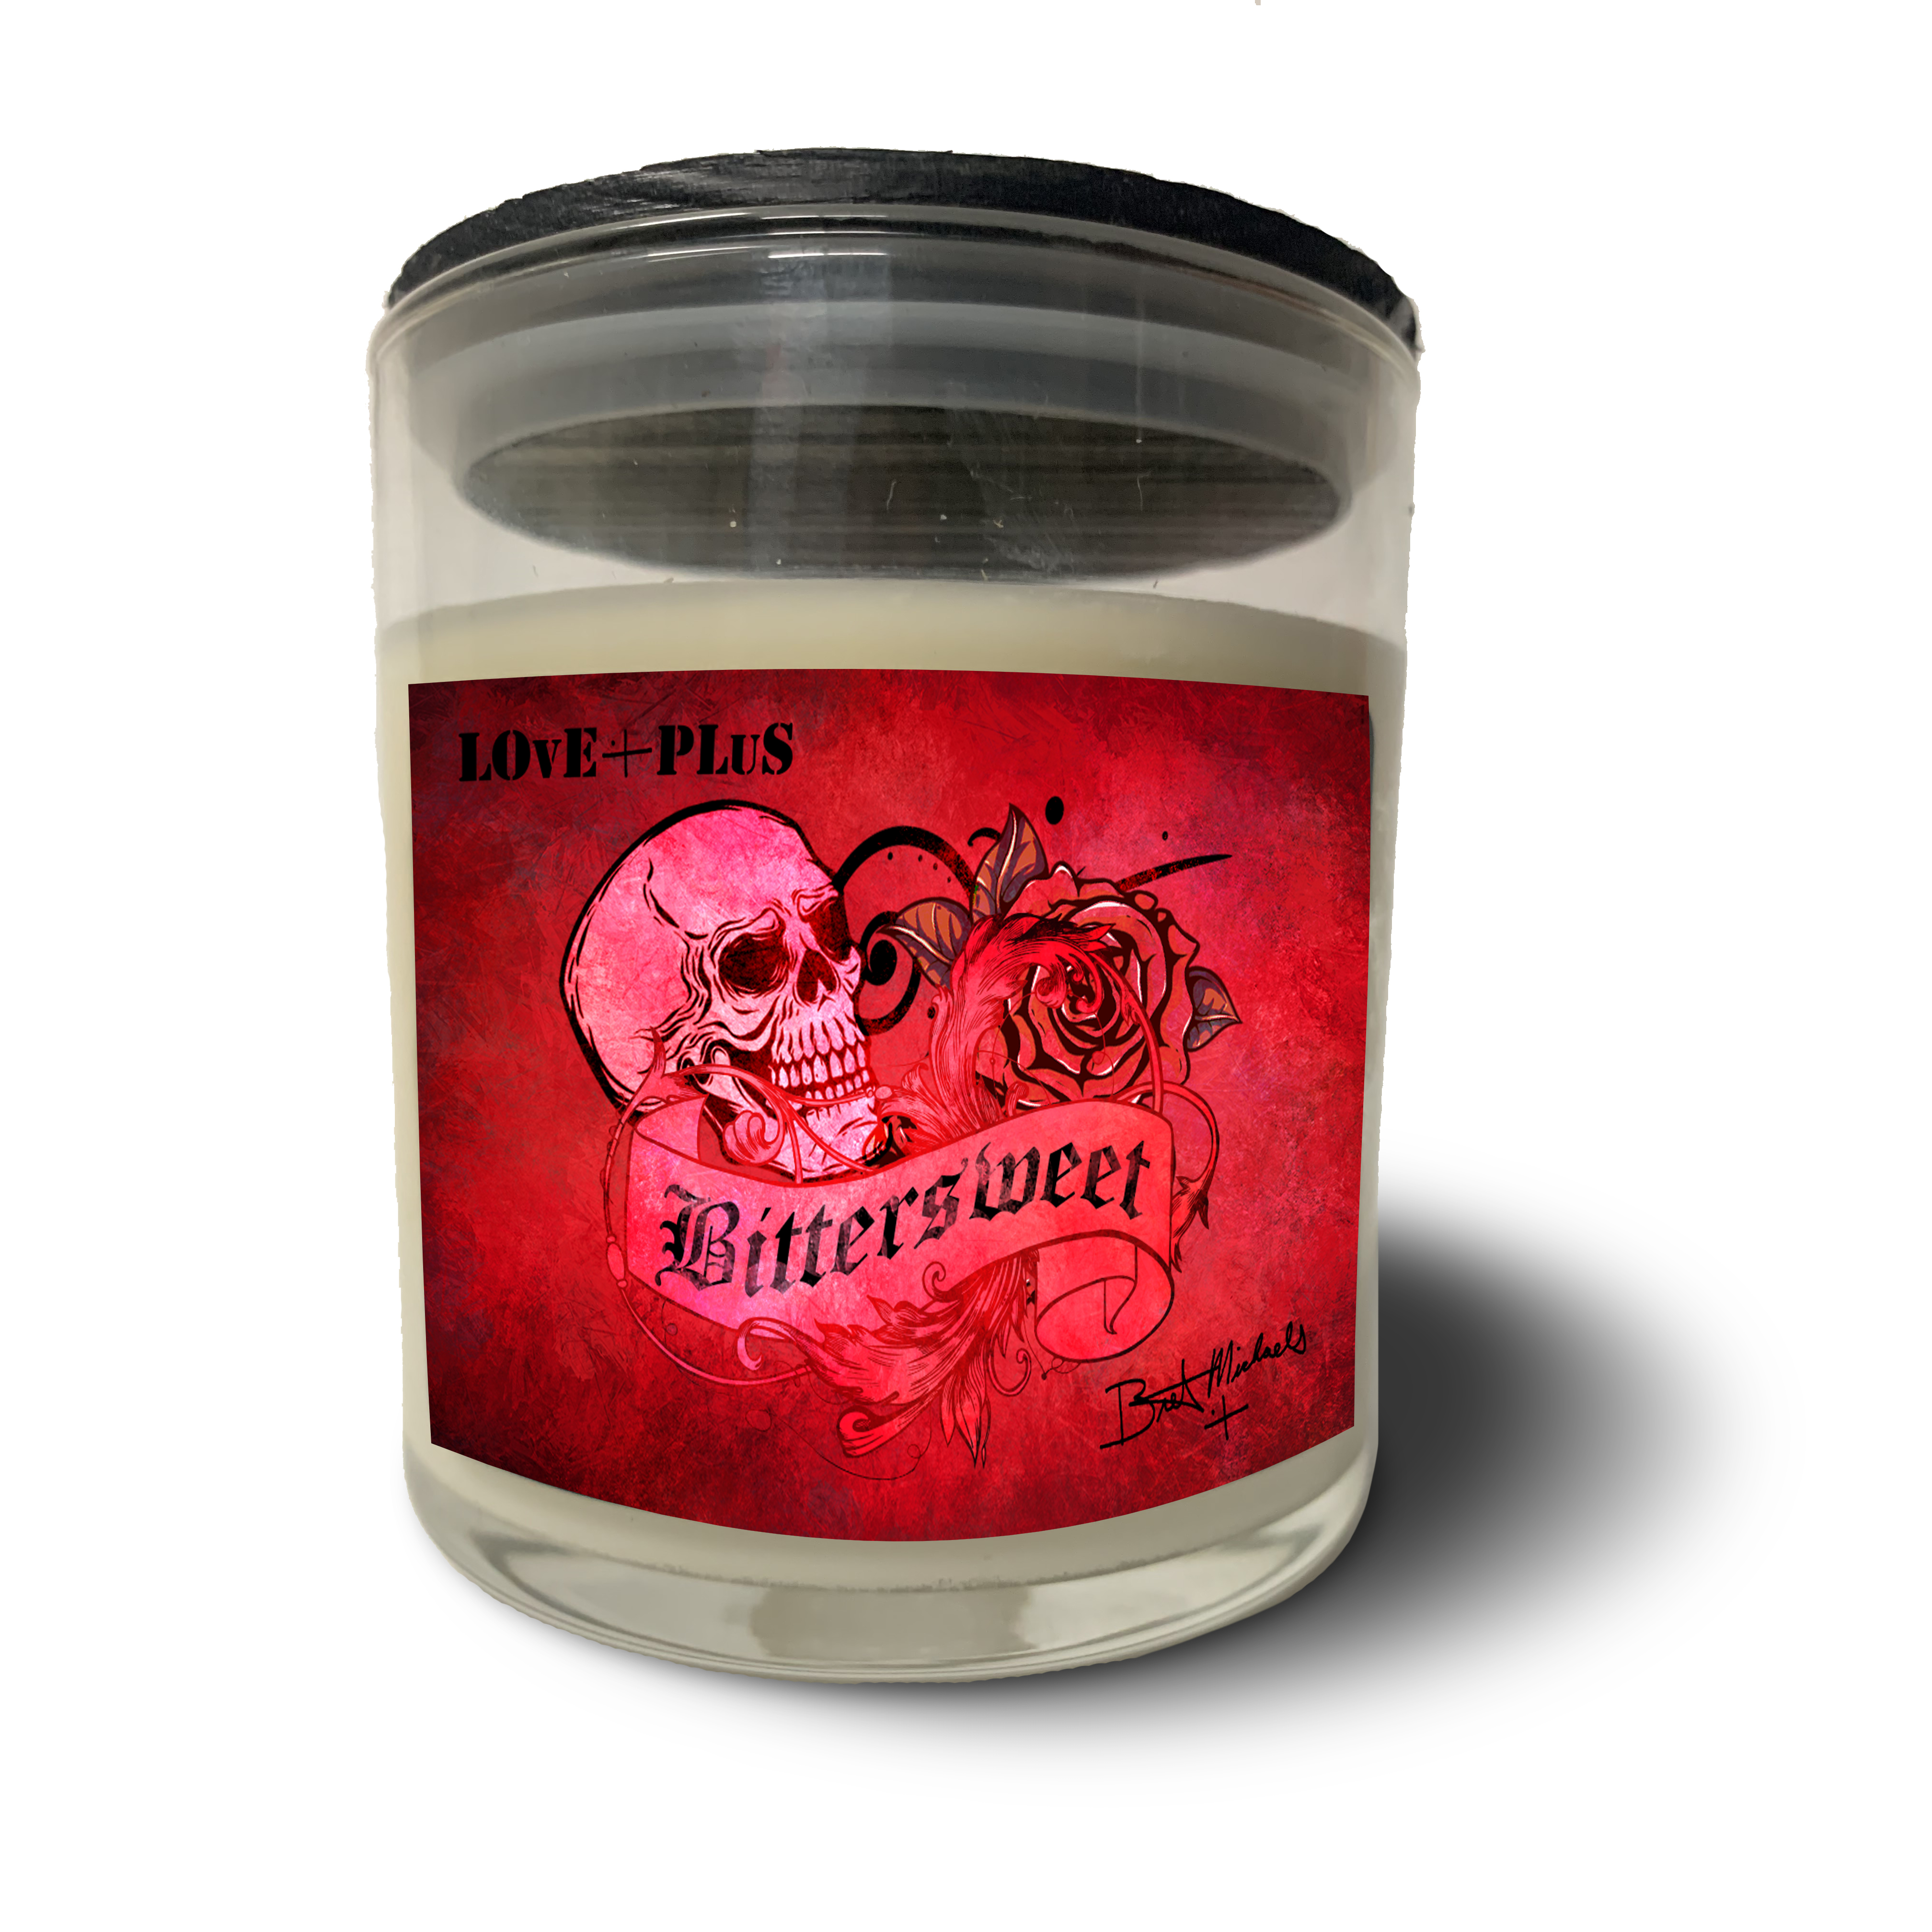 Bittersweet LOvE+PLuS Candle Jar - Limited Edition Bret Michaels, Brett Michaels, Bret Micheals, Brett Micheals, LIfestyle, Style, Life, Collection, Home, Inspiration, gifts, candle, LOVE+PLUS, key lime, valentine's day